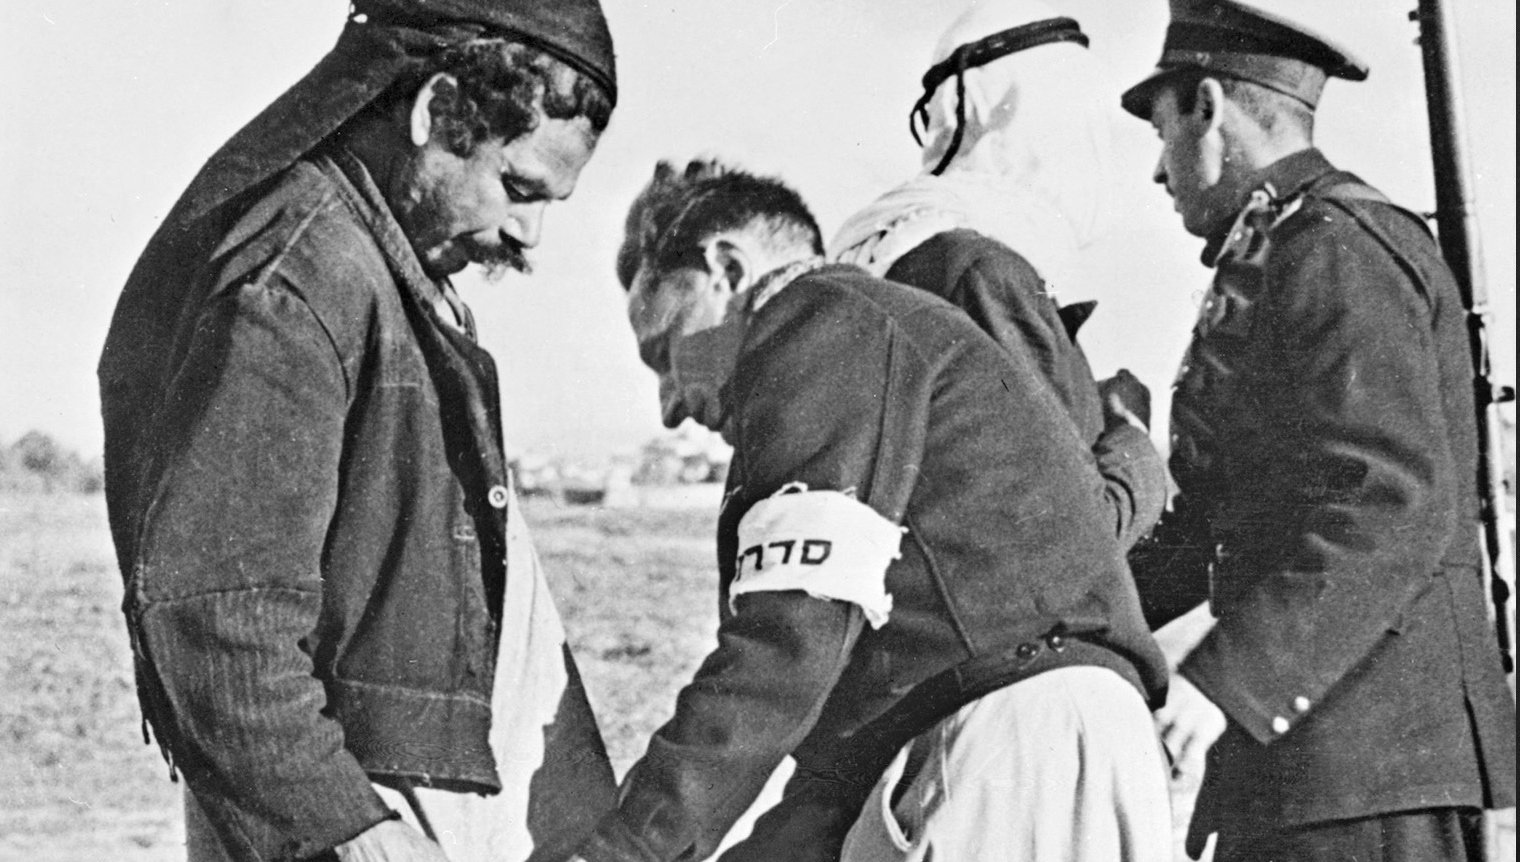 Members of Haganah search two Palestinians at the Tel Aviv gate on 20 January 1948 (AFP)